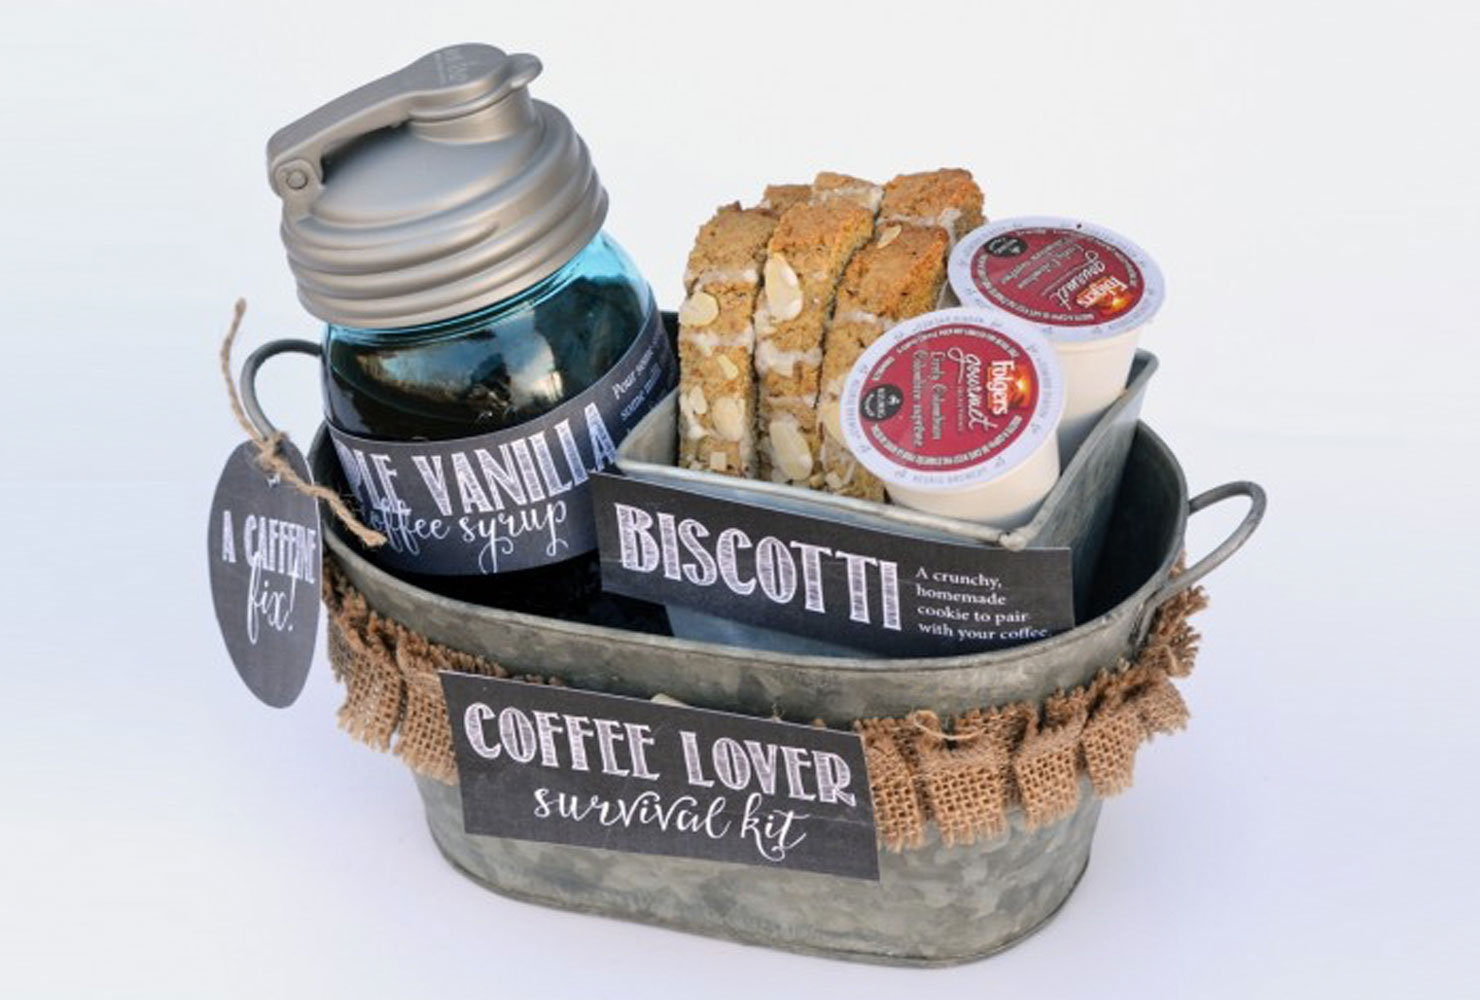 Coffee gift basket with coffee and biscotti